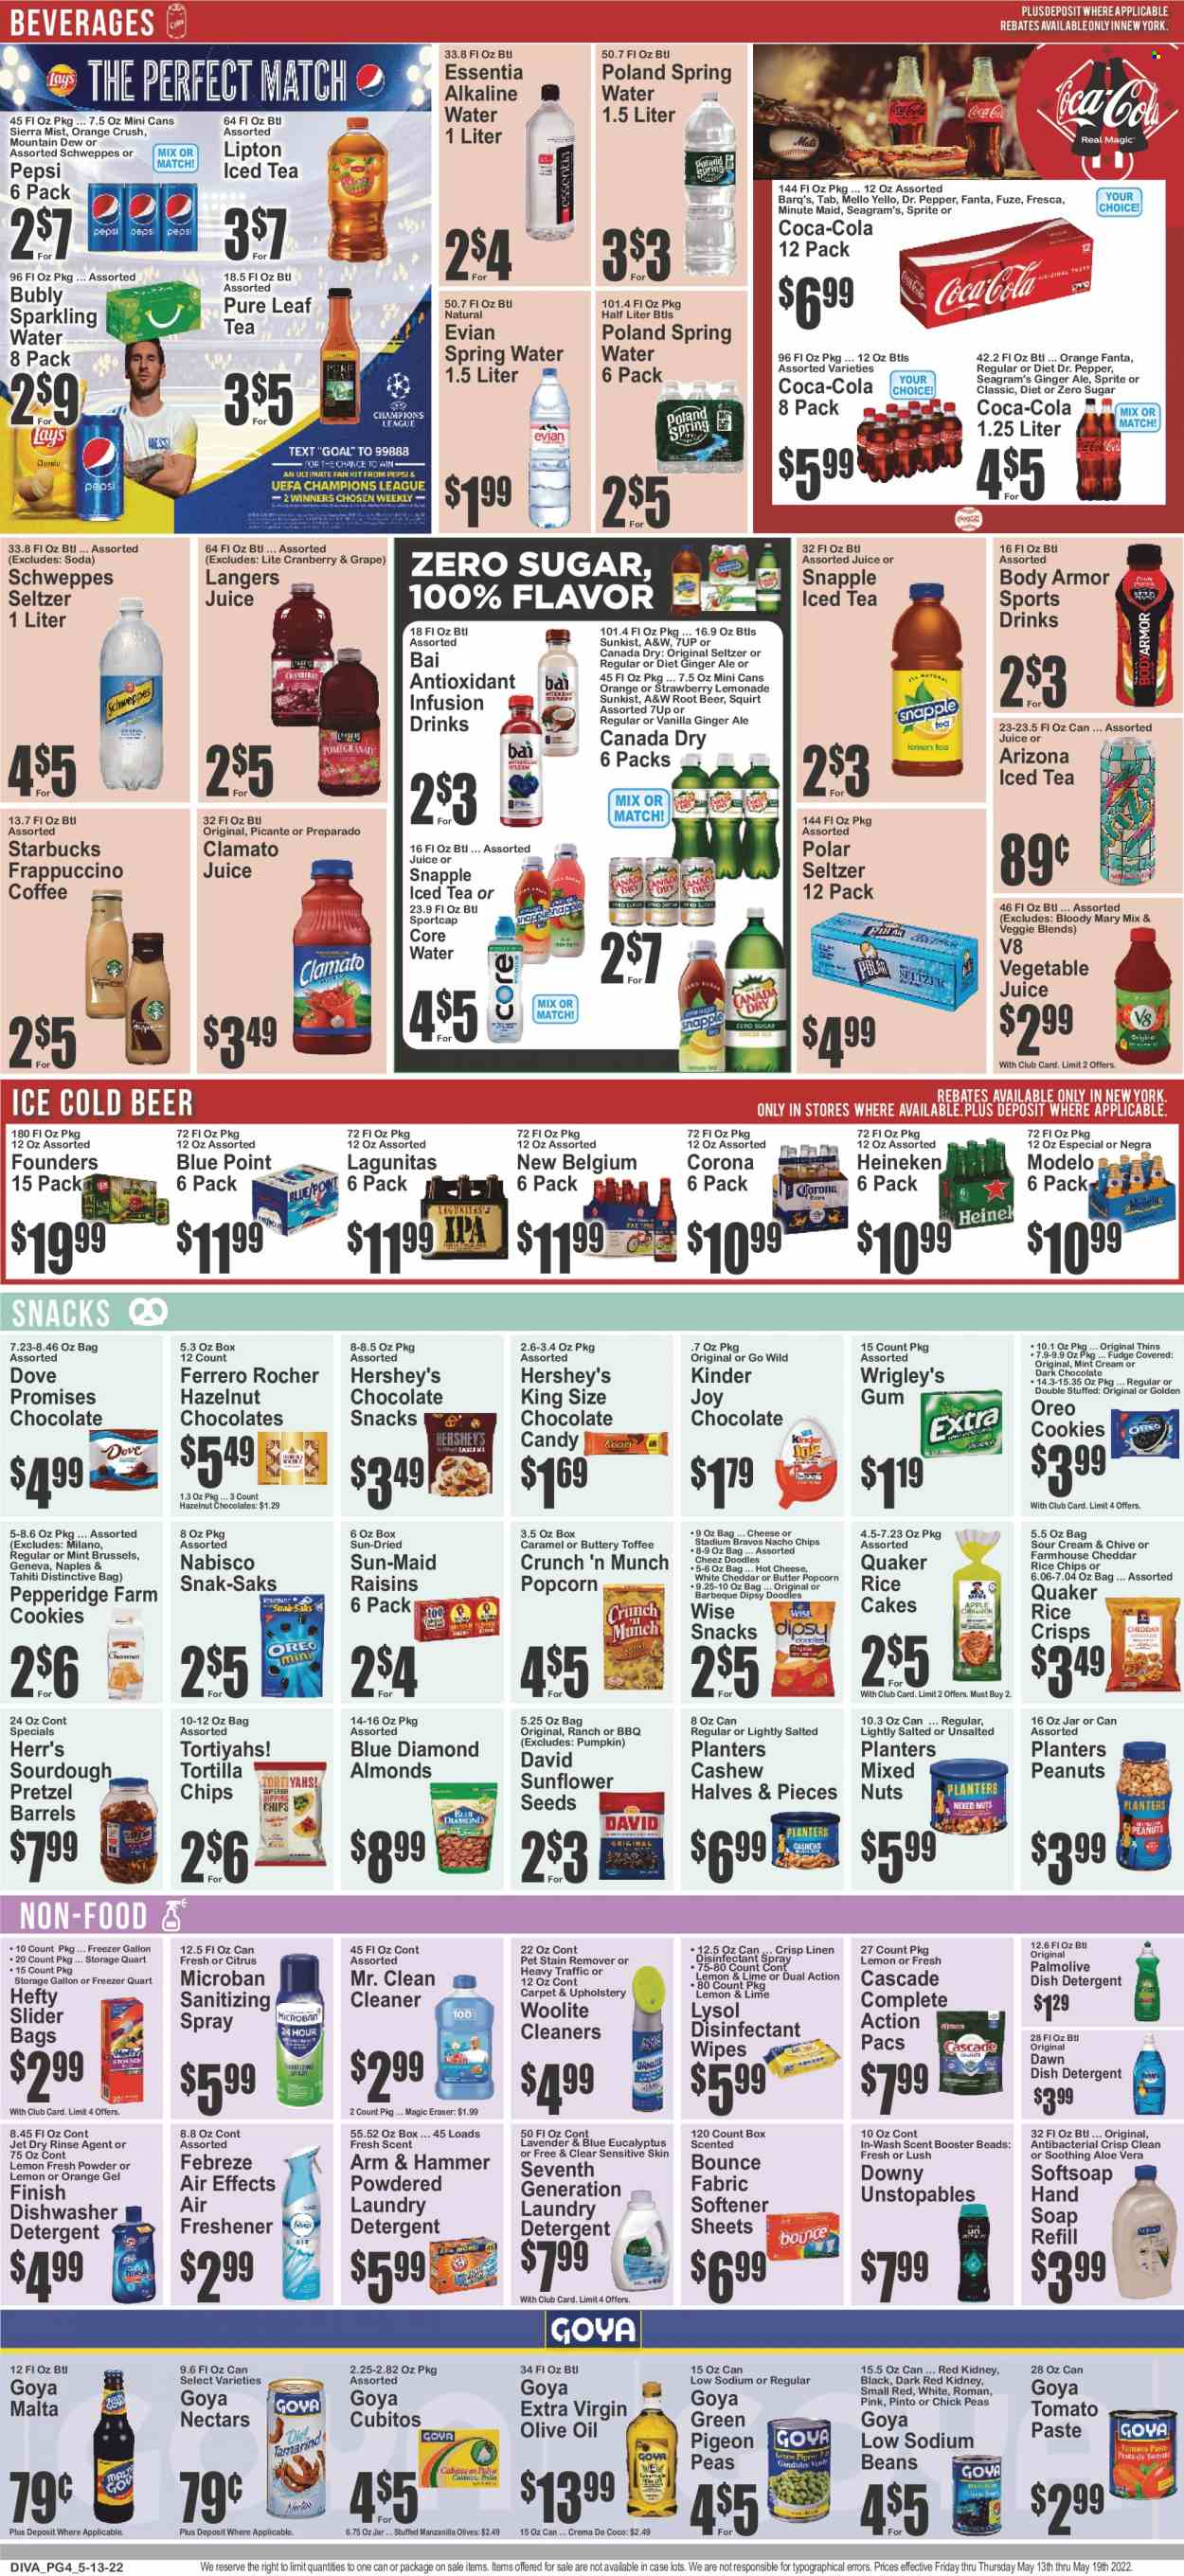 thumbnail - Key Food Flyer - 05/13/2022 - 05/19/2022 - Sales products - pretzels, pumpkin, peas, Quaker, Oreo, butter, Hershey's, cookies, fudge, snack, Ferrero Rocher, Kinder Joy, toffee, chocolate candies, tortilla chips, chips, Thins, popcorn, rice crisps, ARM & HAMMER, tomato paste, olives, Goya, rice, toor dal, extra virgin olive oil, olive oil, oil, almonds, raisins, peanuts, dried fruit, sunflower seeds, mixed nuts, Planters, Blue Diamond, Canada Dry, Coca-Cola, ginger ale, lemonade, Mountain Dew, Schweppes, Sprite, Pepsi, juice, Fanta, Body Armor, Lipton, ice tea, Dr. Pepper, Clamato, 7UP, AriZona, Snapple, A&W, Sierra Mist, vegetable juice, Bai, fruit punch, seltzer water, spring water, soda, sparkling water, alkaline water, Evian, Pure Leaf, coffee, Starbucks, frappuccino, beer, Corona Extra, Heineken, Modelo, wipes, Dove, detergent, Febreze, cleaner, desinfection, stain remover, Lysol, Woolite, Cascade, Unstopables, fabric softener, laundry detergent, Bounce, Jet, Softsoap, hand soap, Palmolive, soap, antibacterial spray, Hefty, Pigeon, air freshener. Page 4.